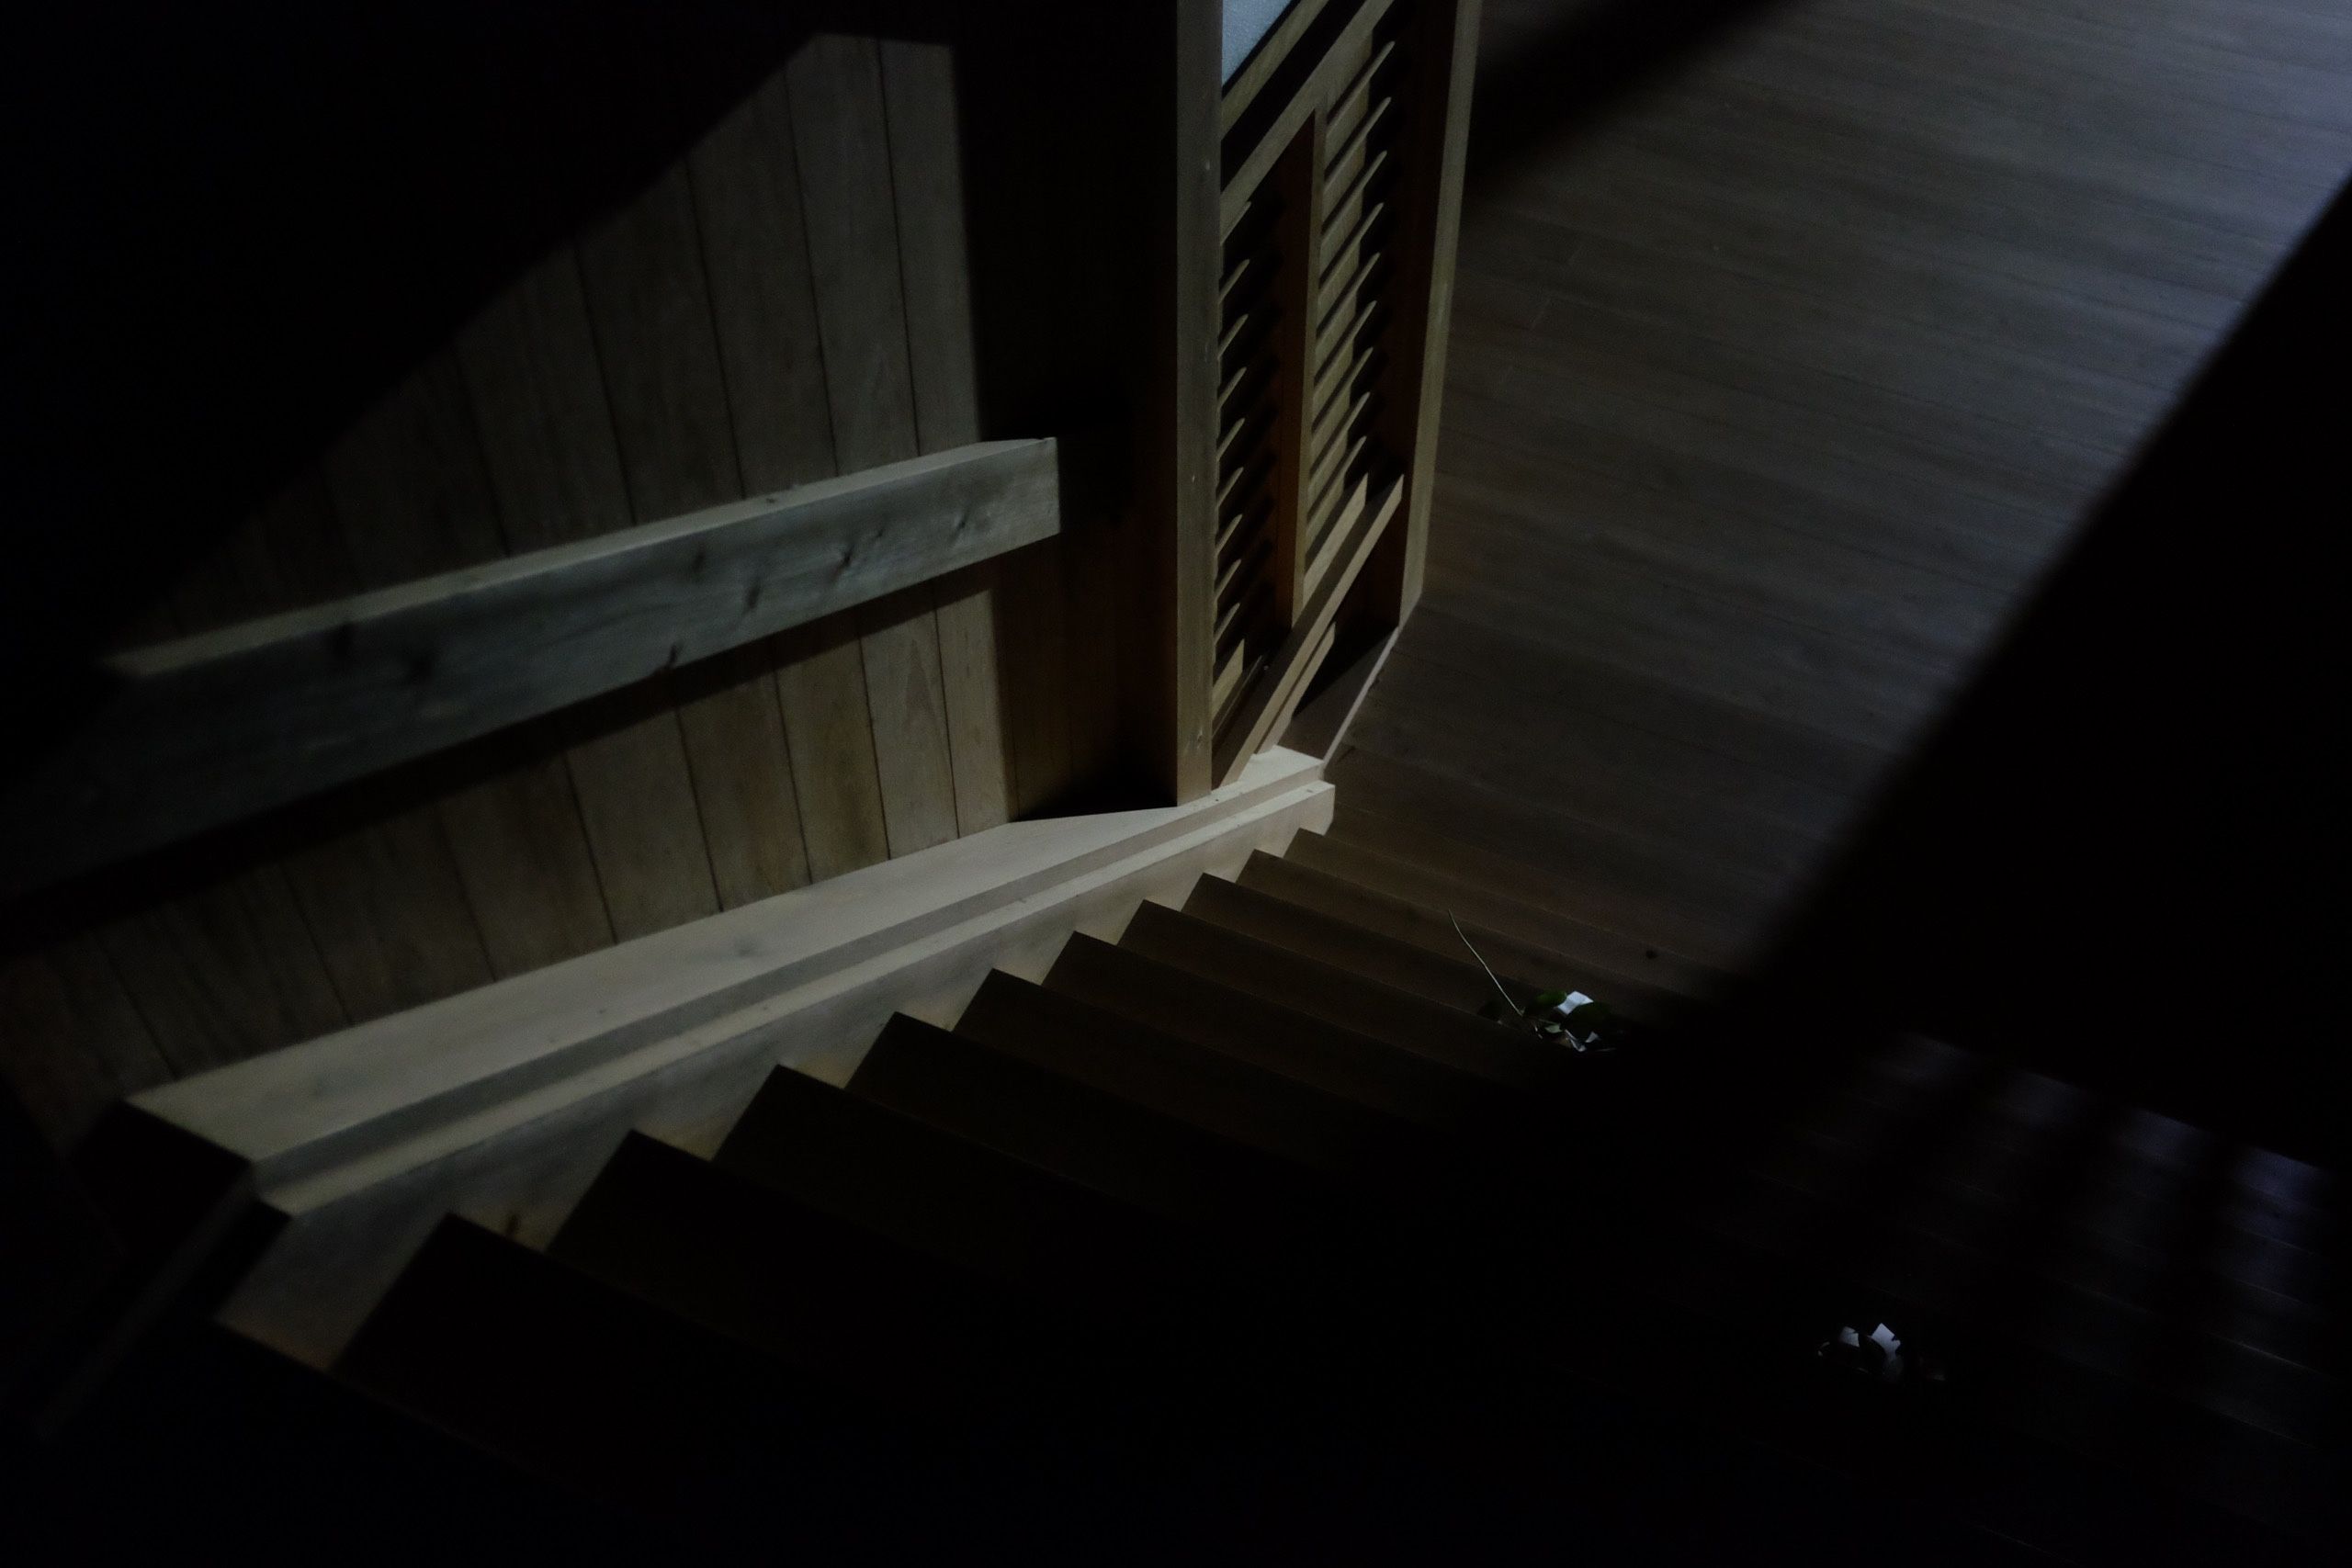 The polished wooden steps and floor of a Japanese shrine in the darkness.